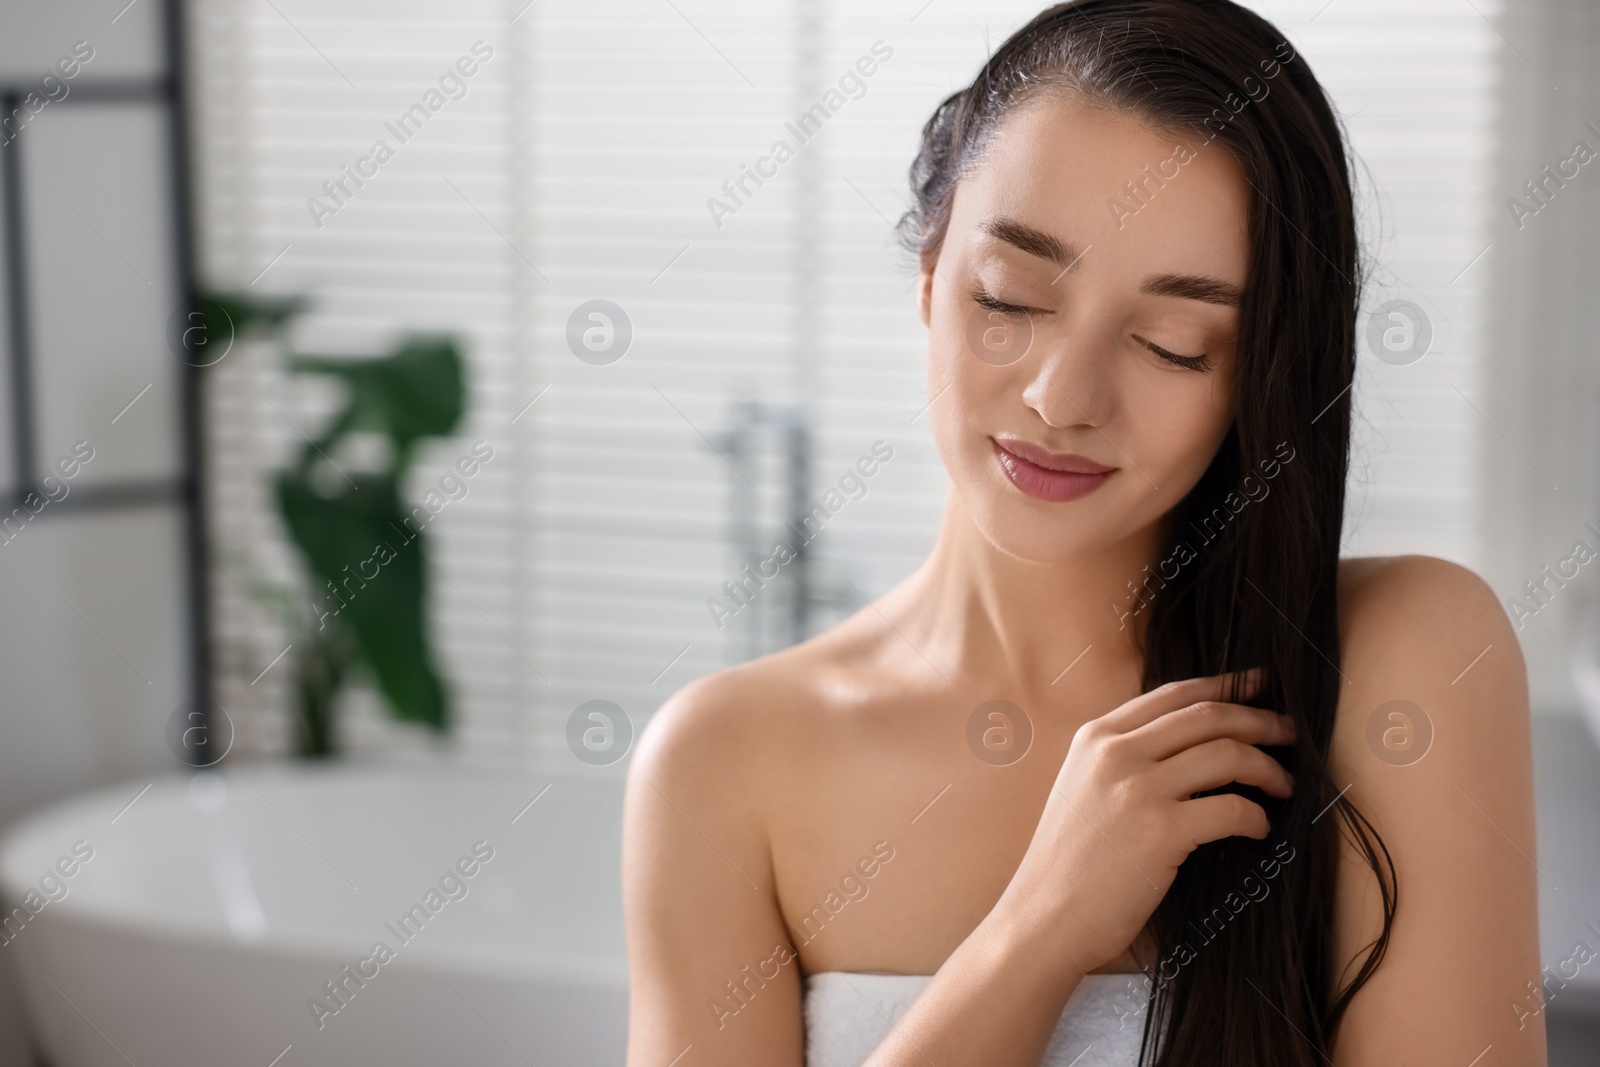 Photo of Beautiful young woman after shower in bathroom. Space for text